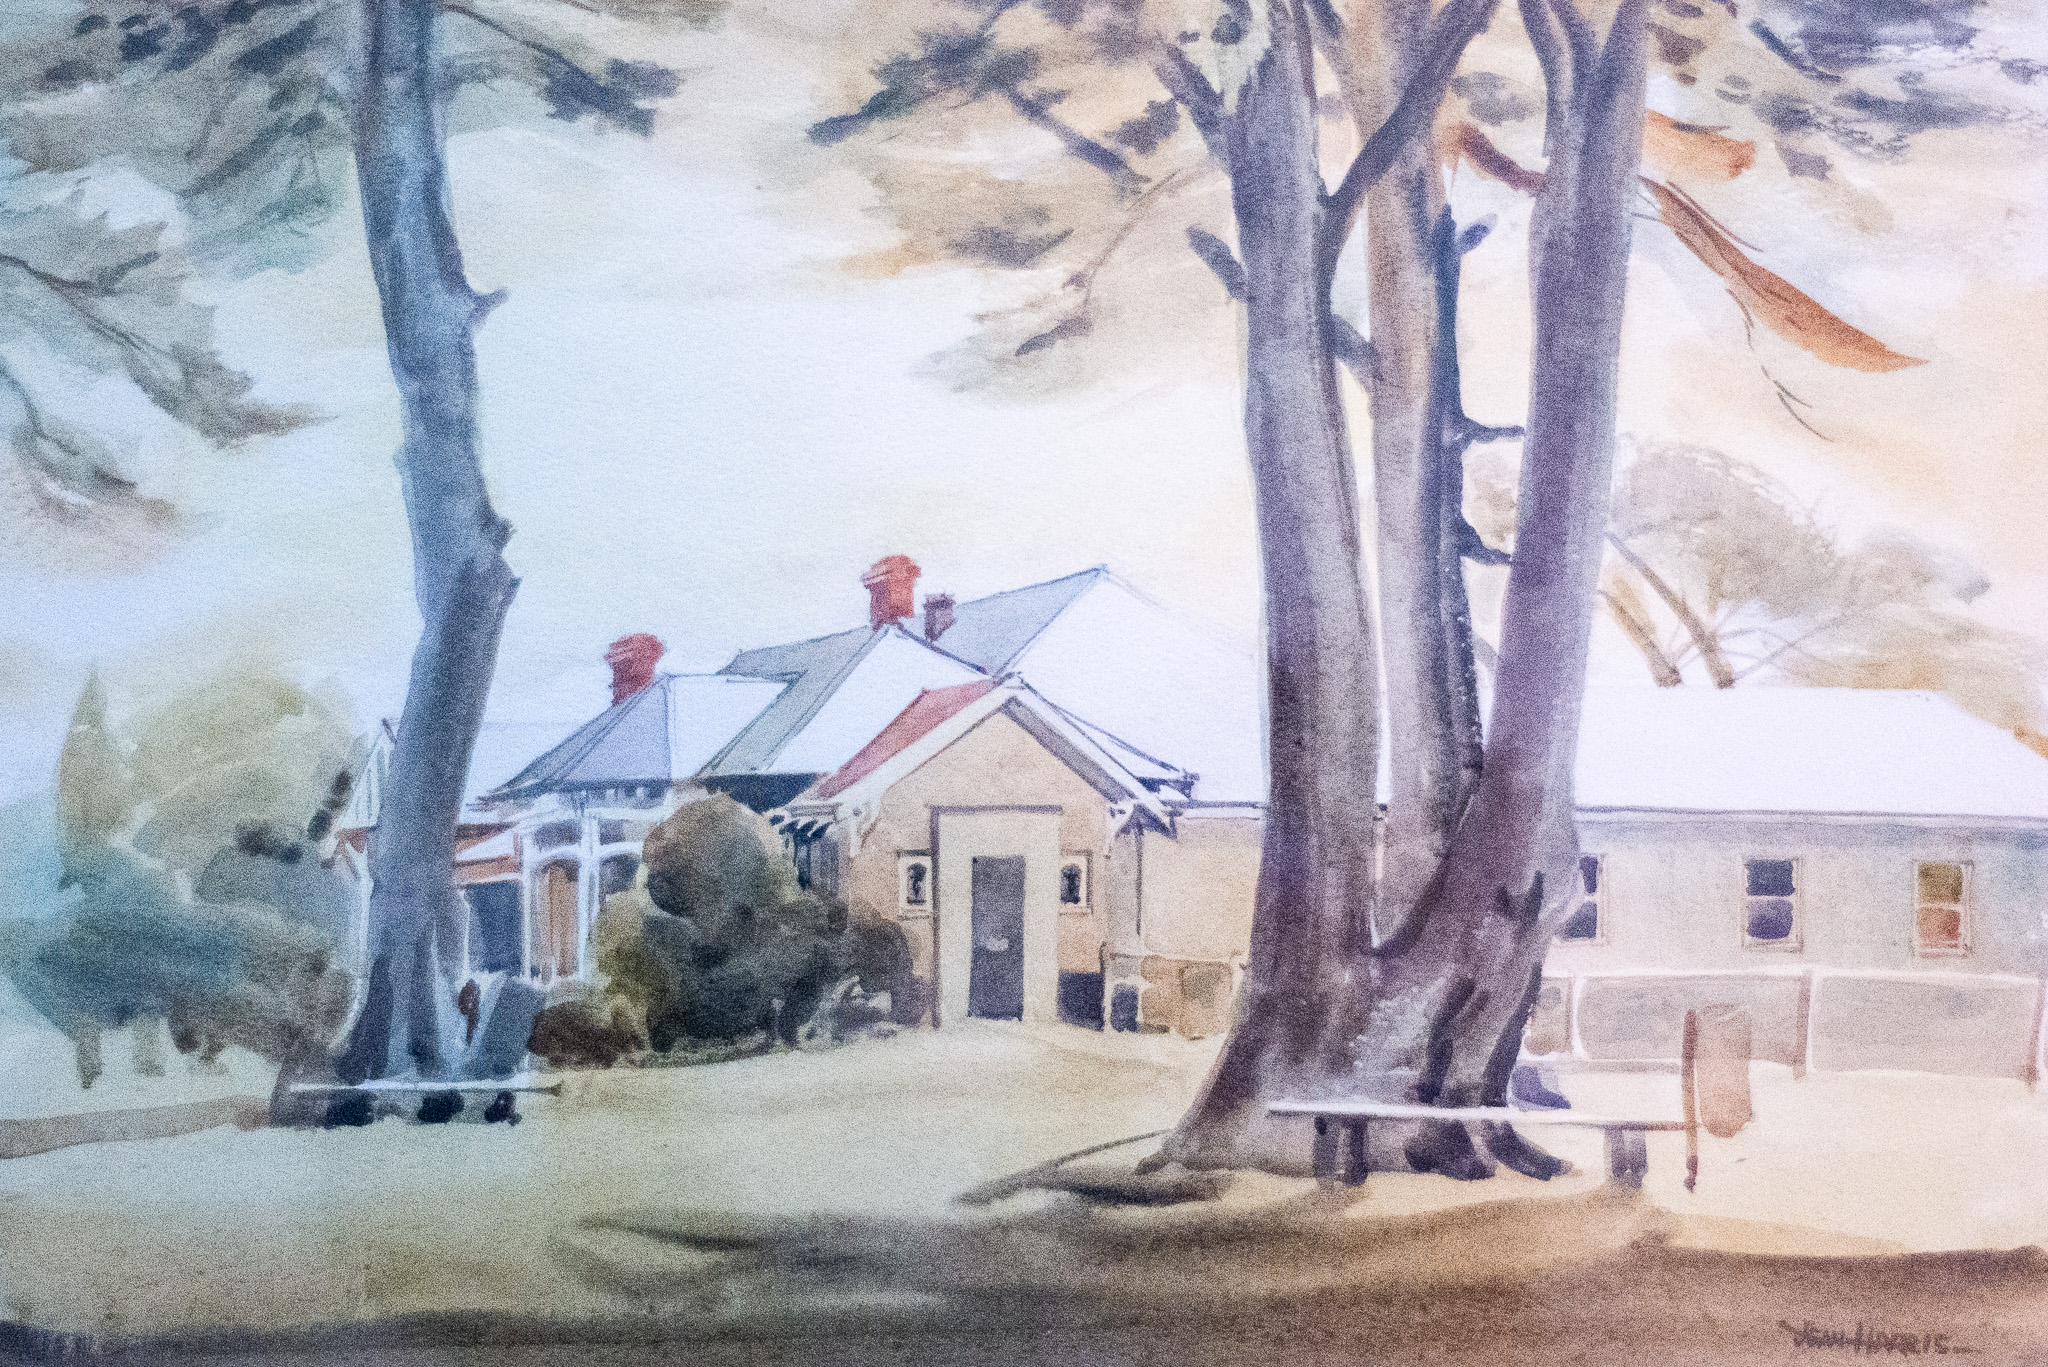 Watercolour of the Altona Homestead depicting the fireplace door conversion by artist Jean Harris.